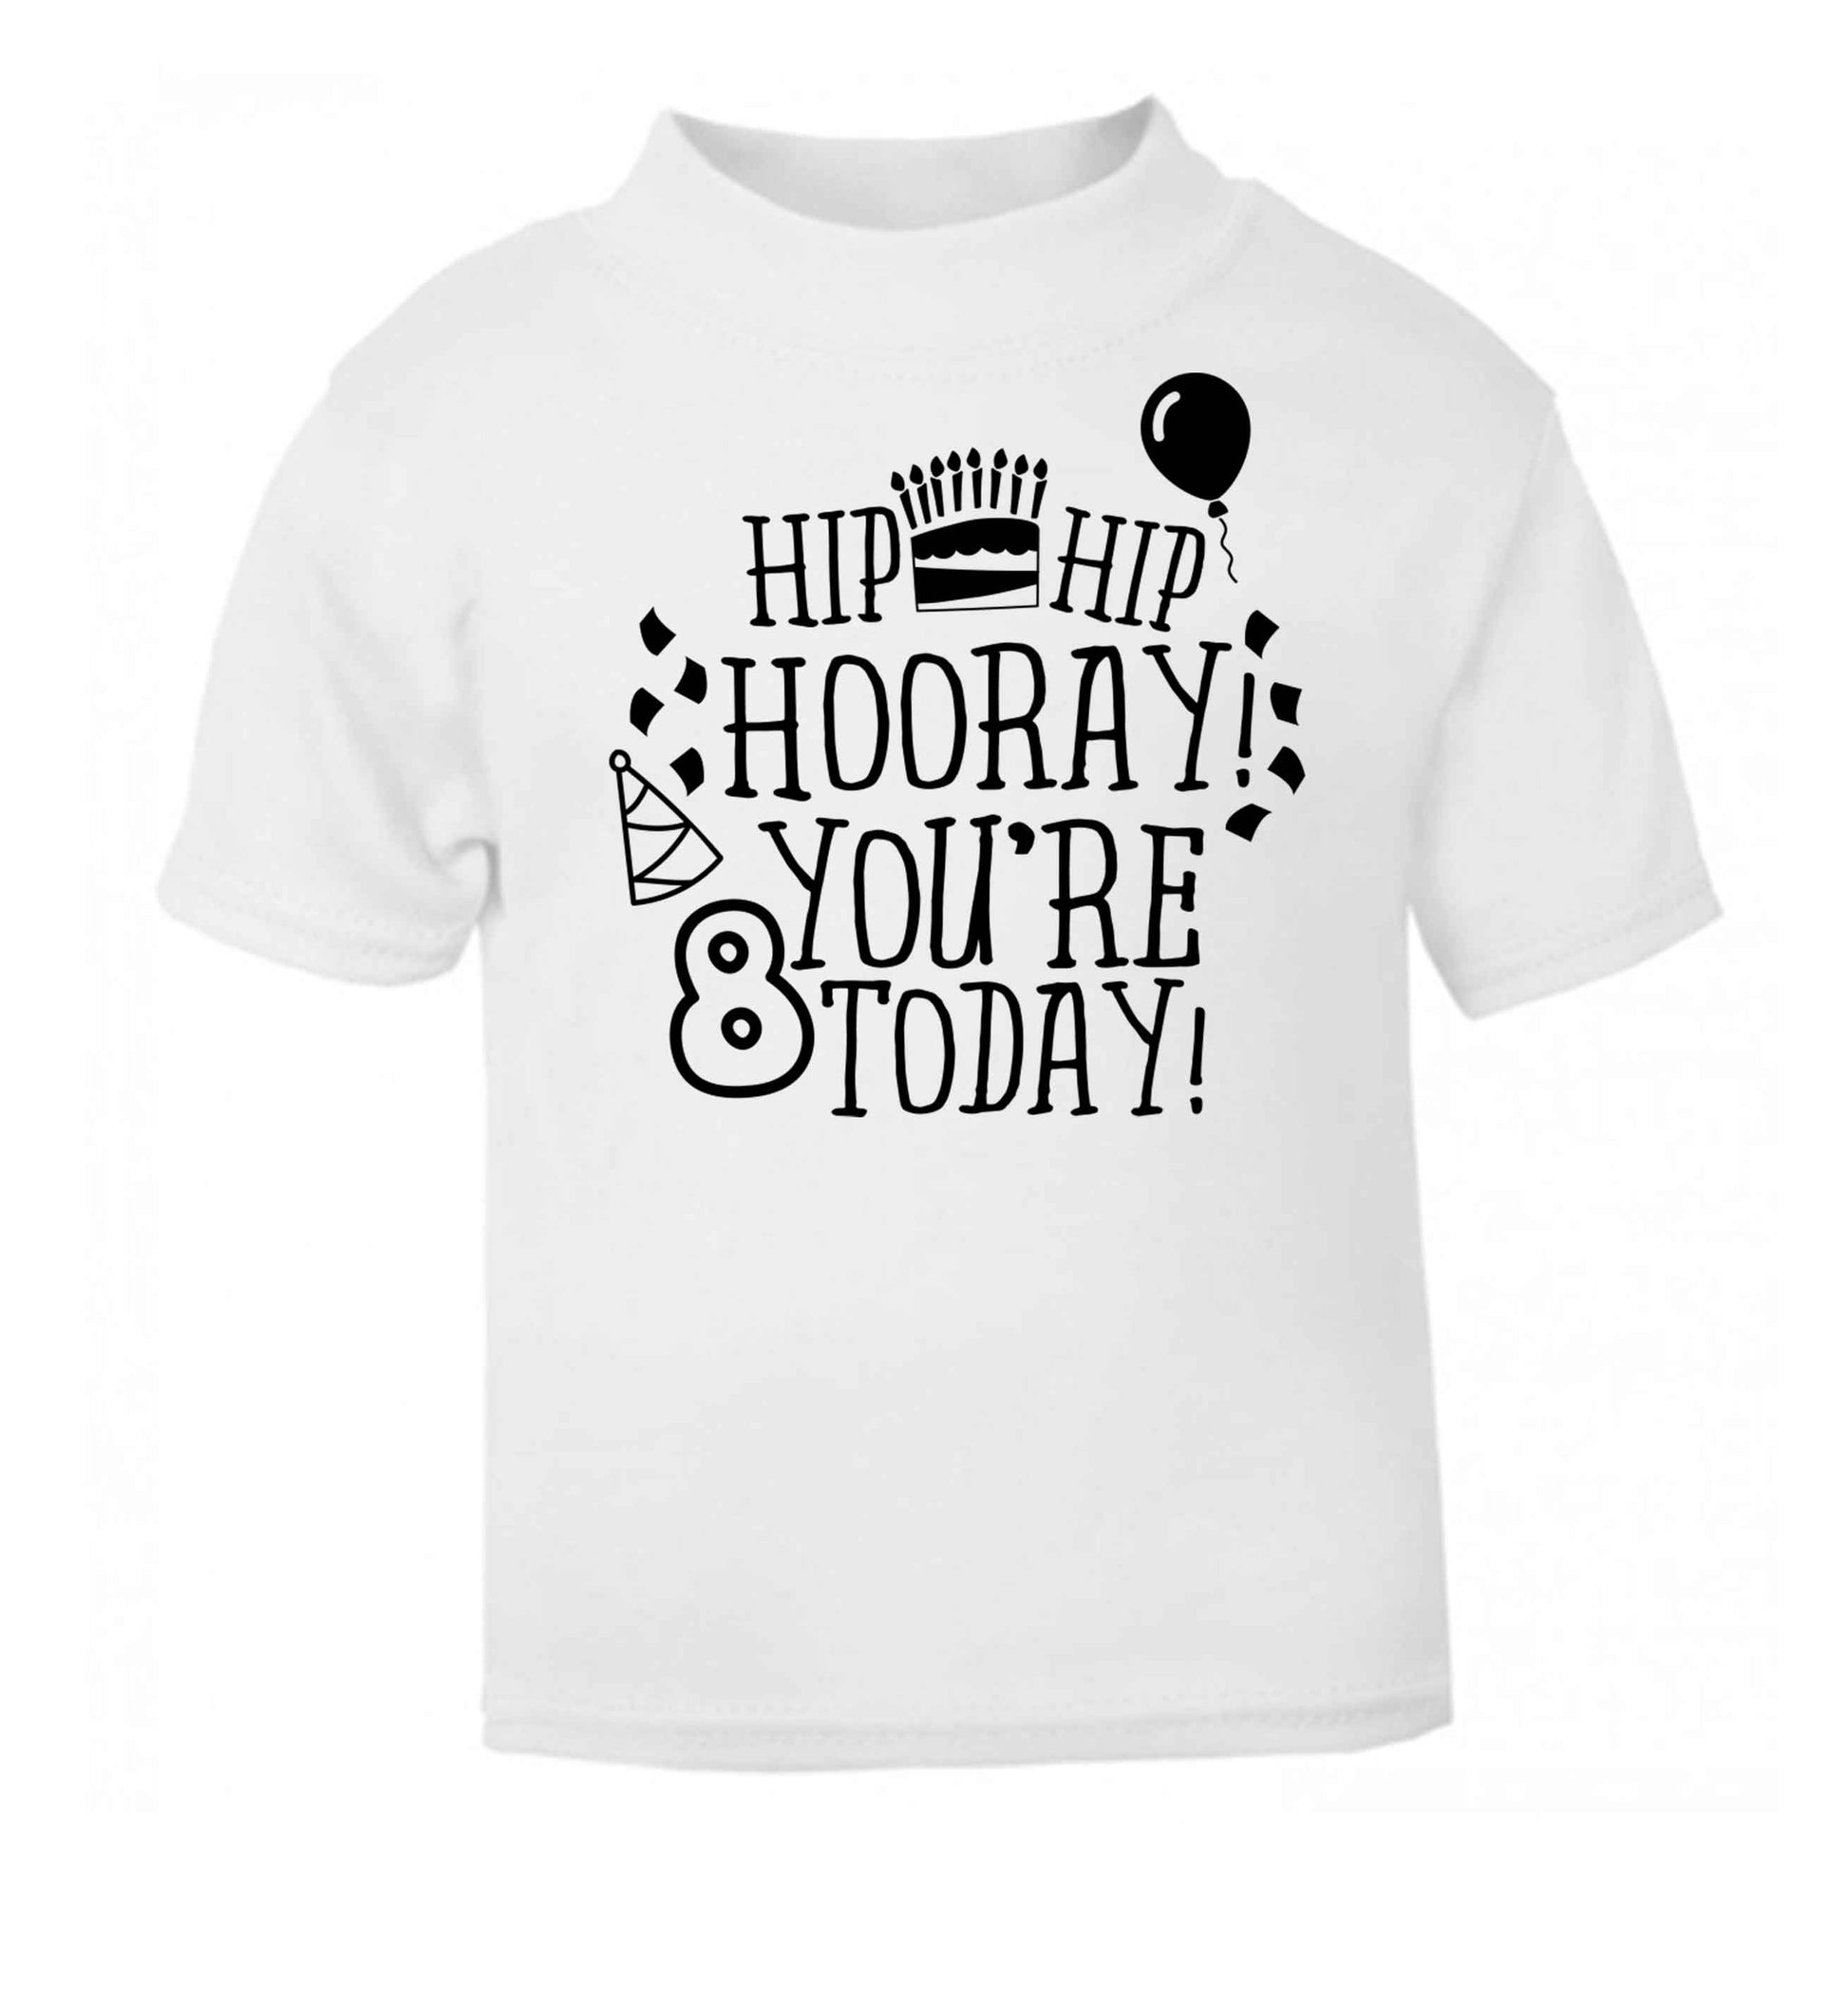 Hip hip hooray you're 8 today! white baby toddler Tshirt 2 Years